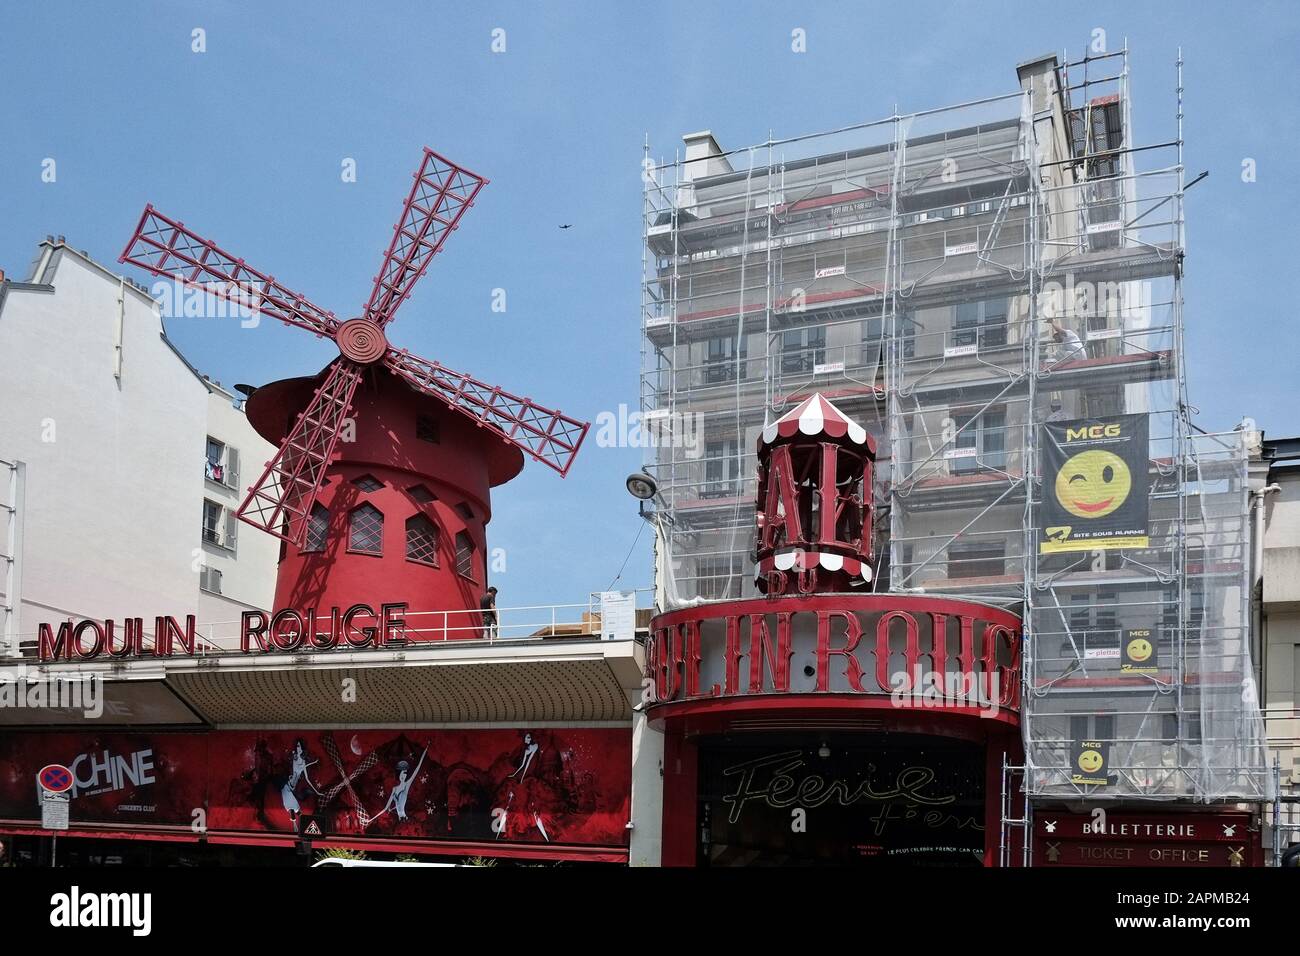 Moulin Rouge, The Famous Windmill by Day in Red the Sky in Blue and surrounding buildings in White, A French Tricolour of History and Entertainment Stock Photo